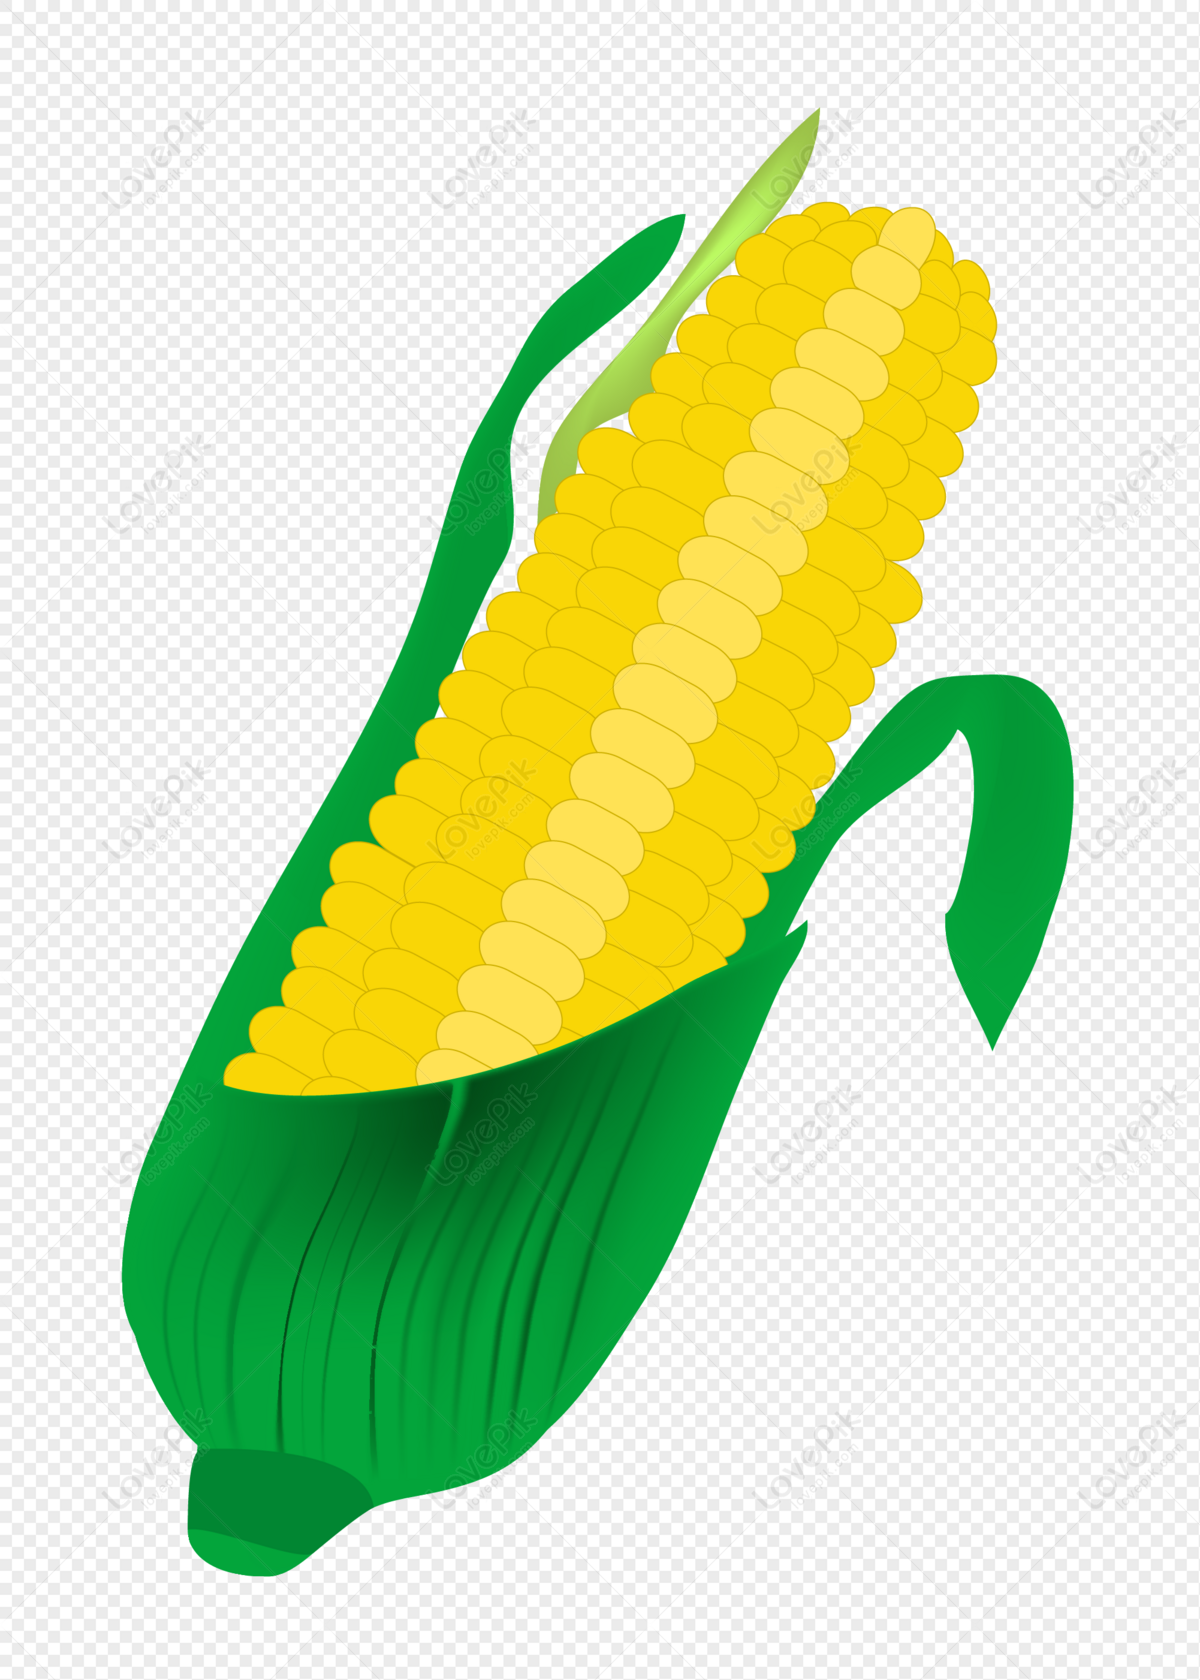 Yellow Corn Cob PNG Picture And Clipart Image For Free Download - Lovepik |  401385745